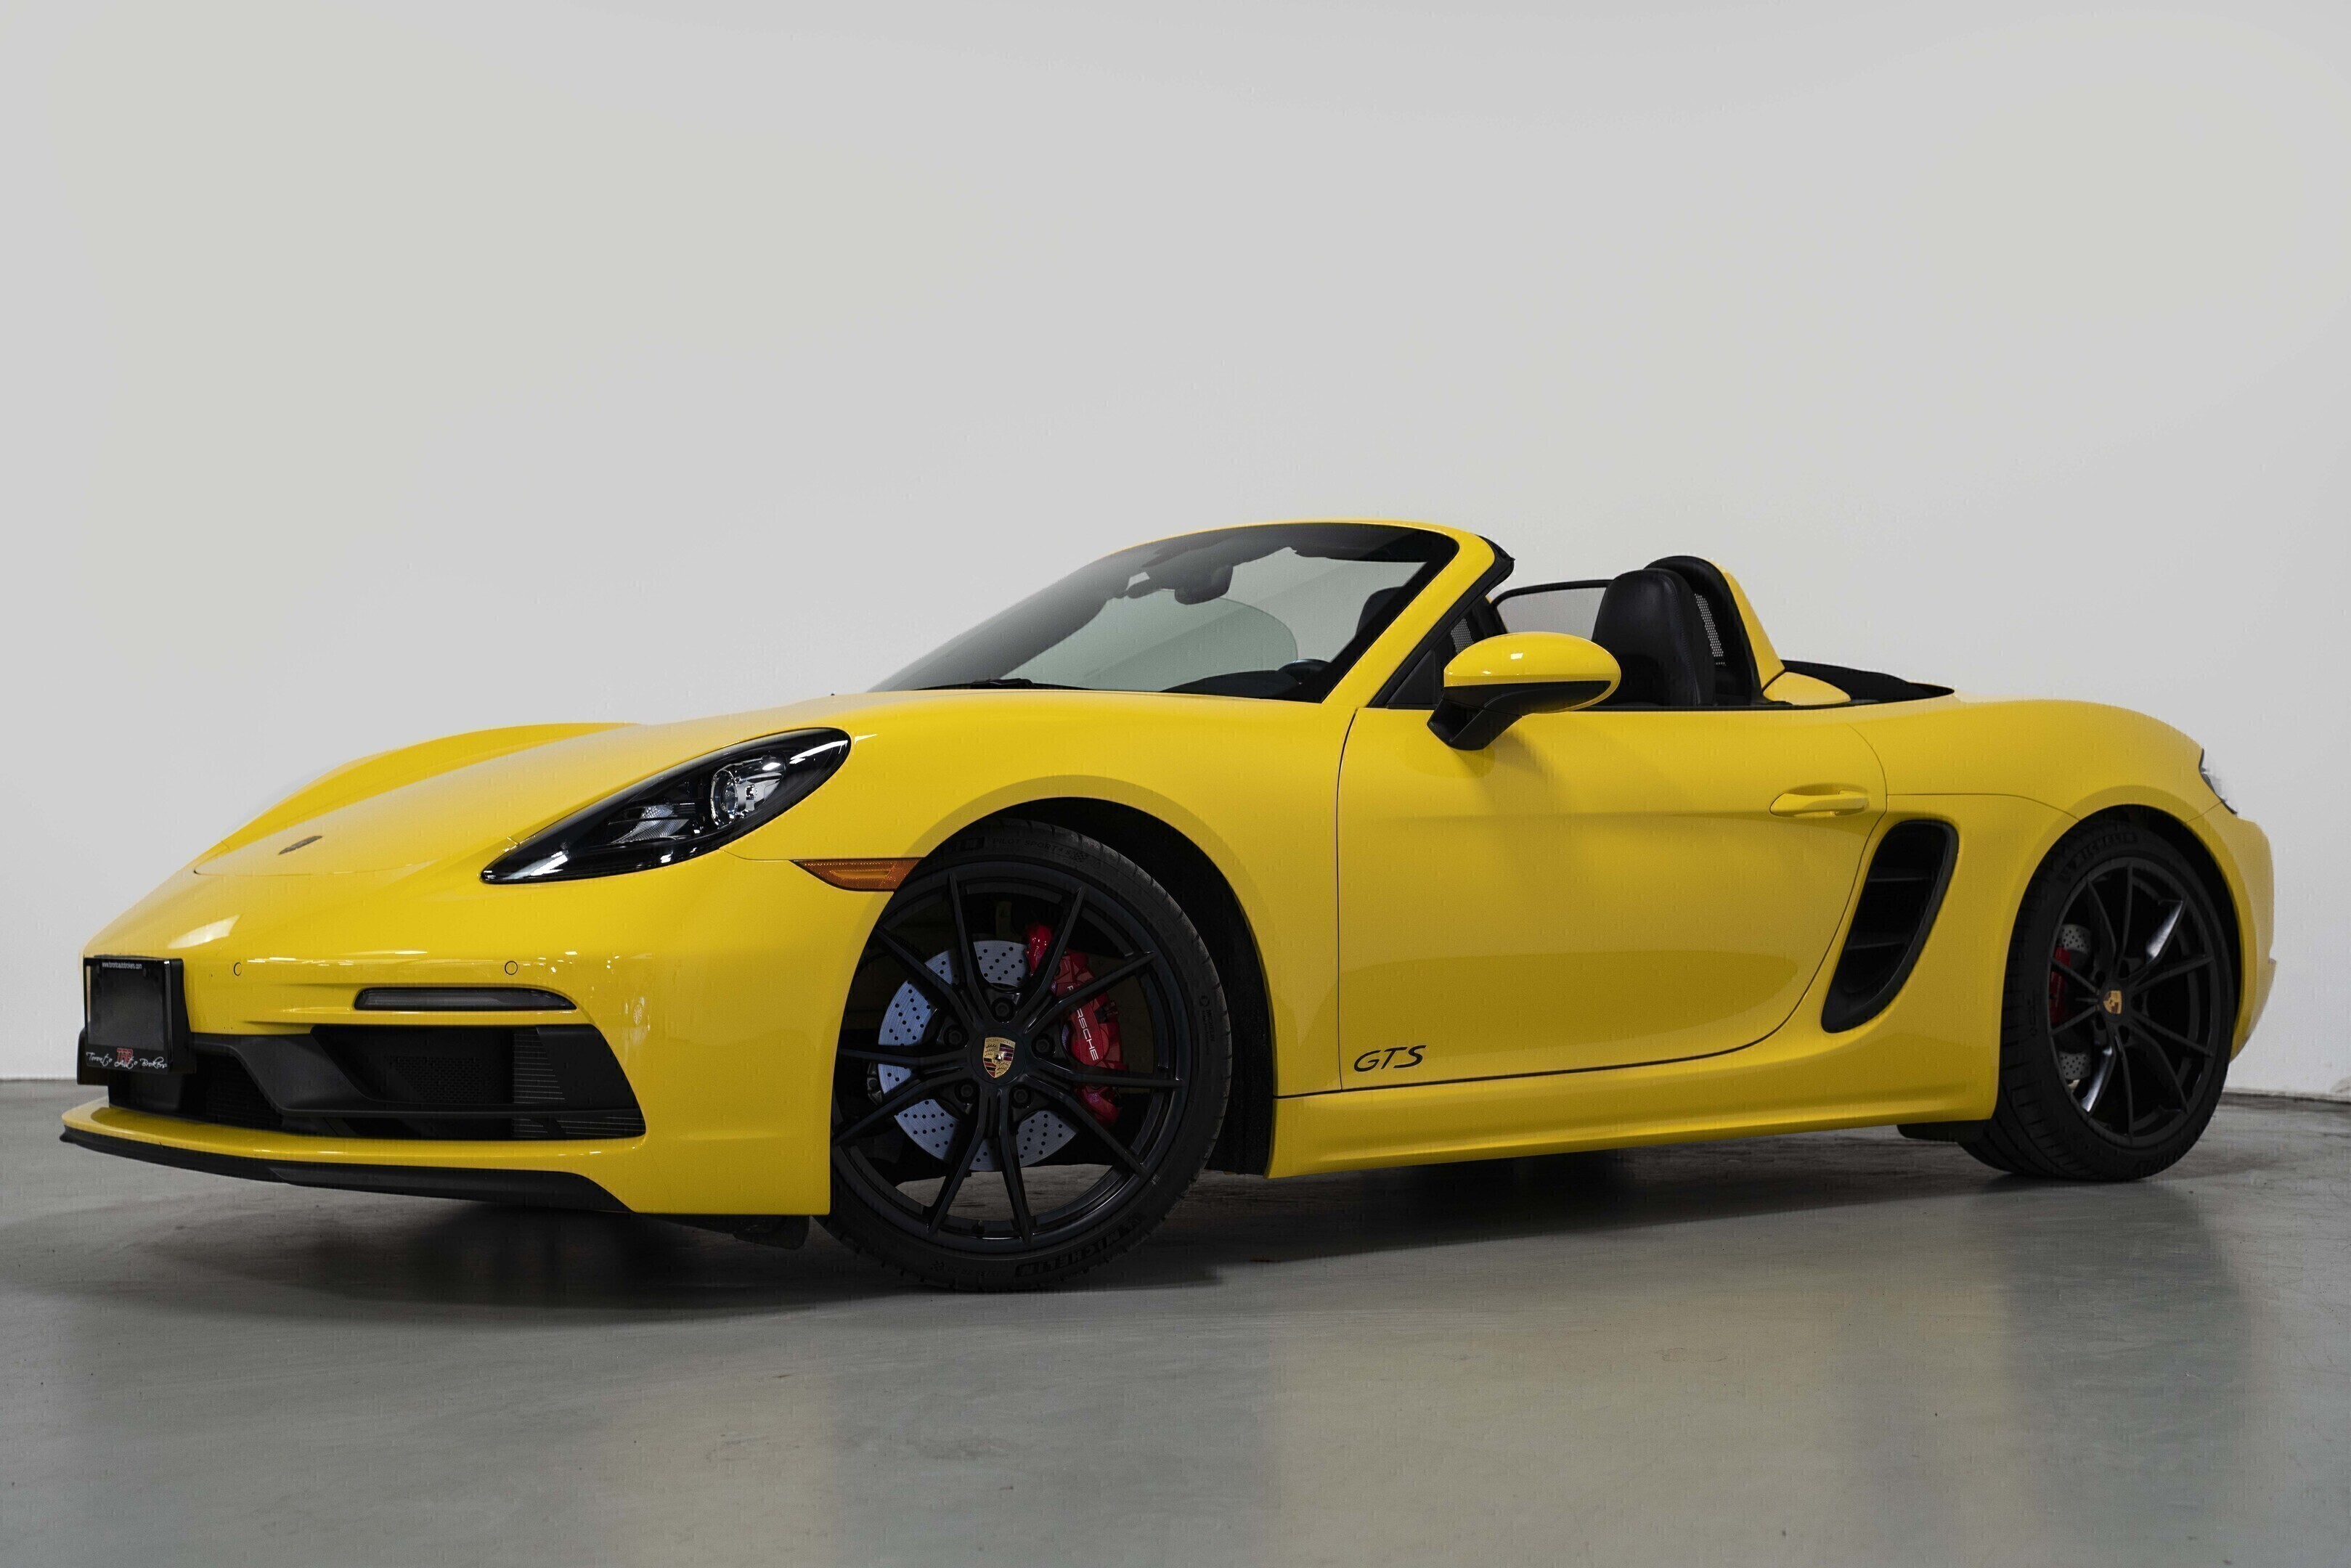 2019 Porsche 718 Boxster GTS I ROADSTER I 20 IN WHEELS | NO LUXURY TAX